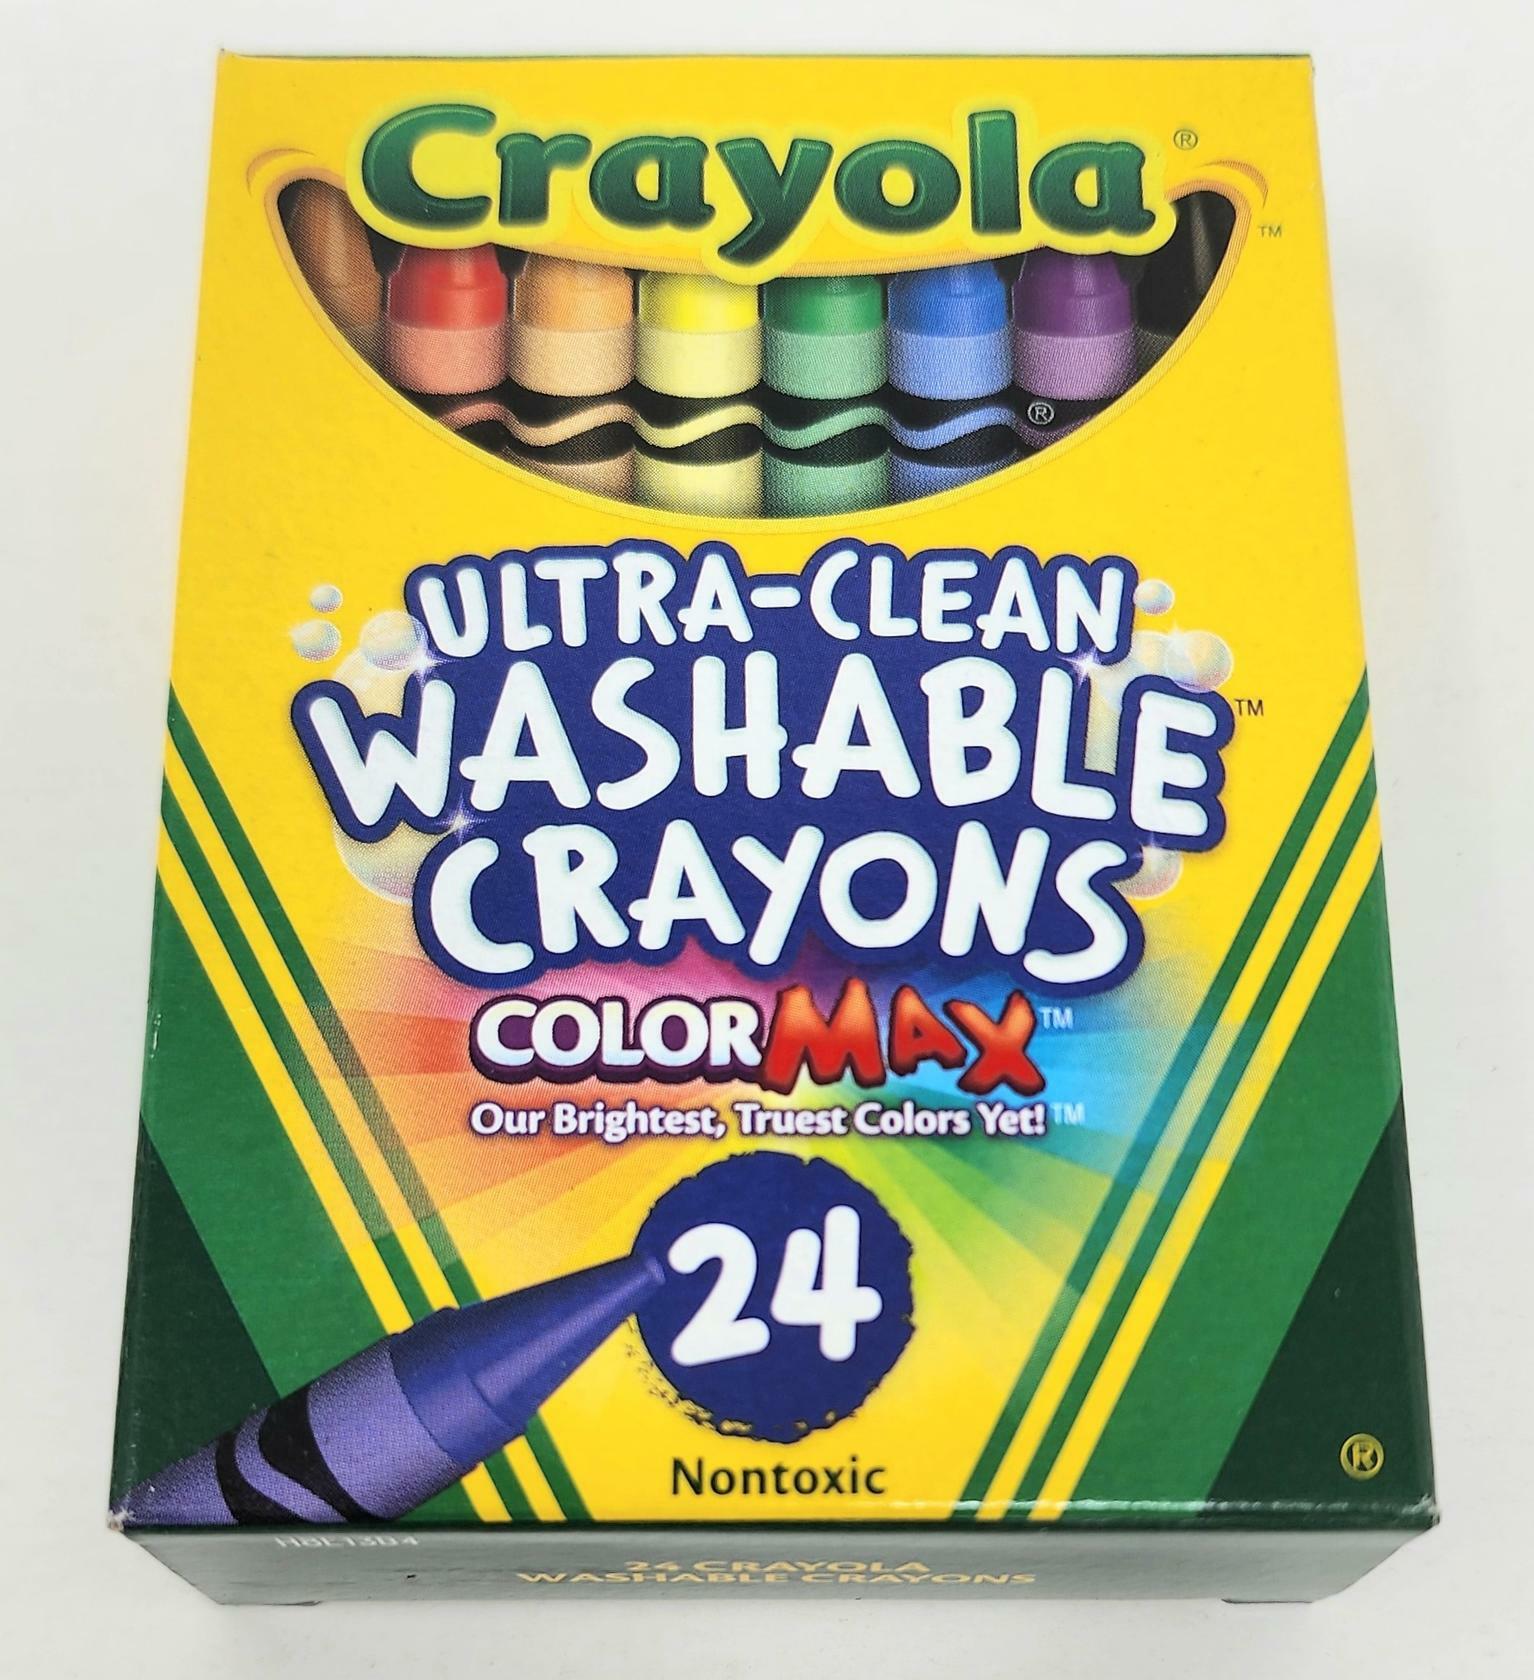 Crayola Ultra-Clean Washable Crayons 24 per Pack